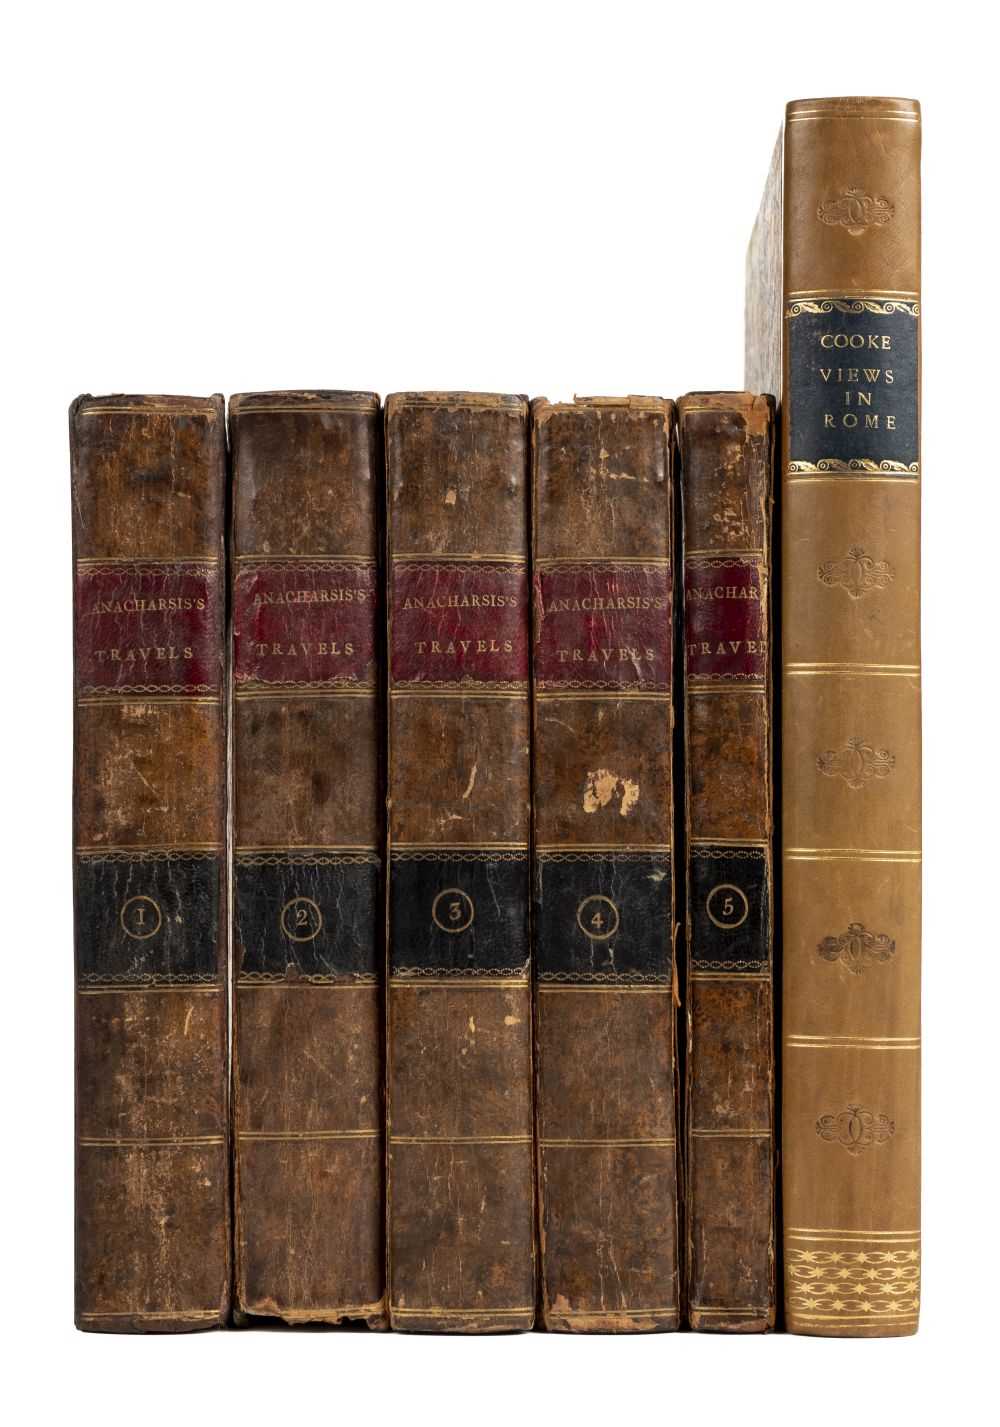 Lot 132 - Barthelemy (Jean-Jacques). Travels of Anacharsis the Younger in Greece, 5 volumes, 1796